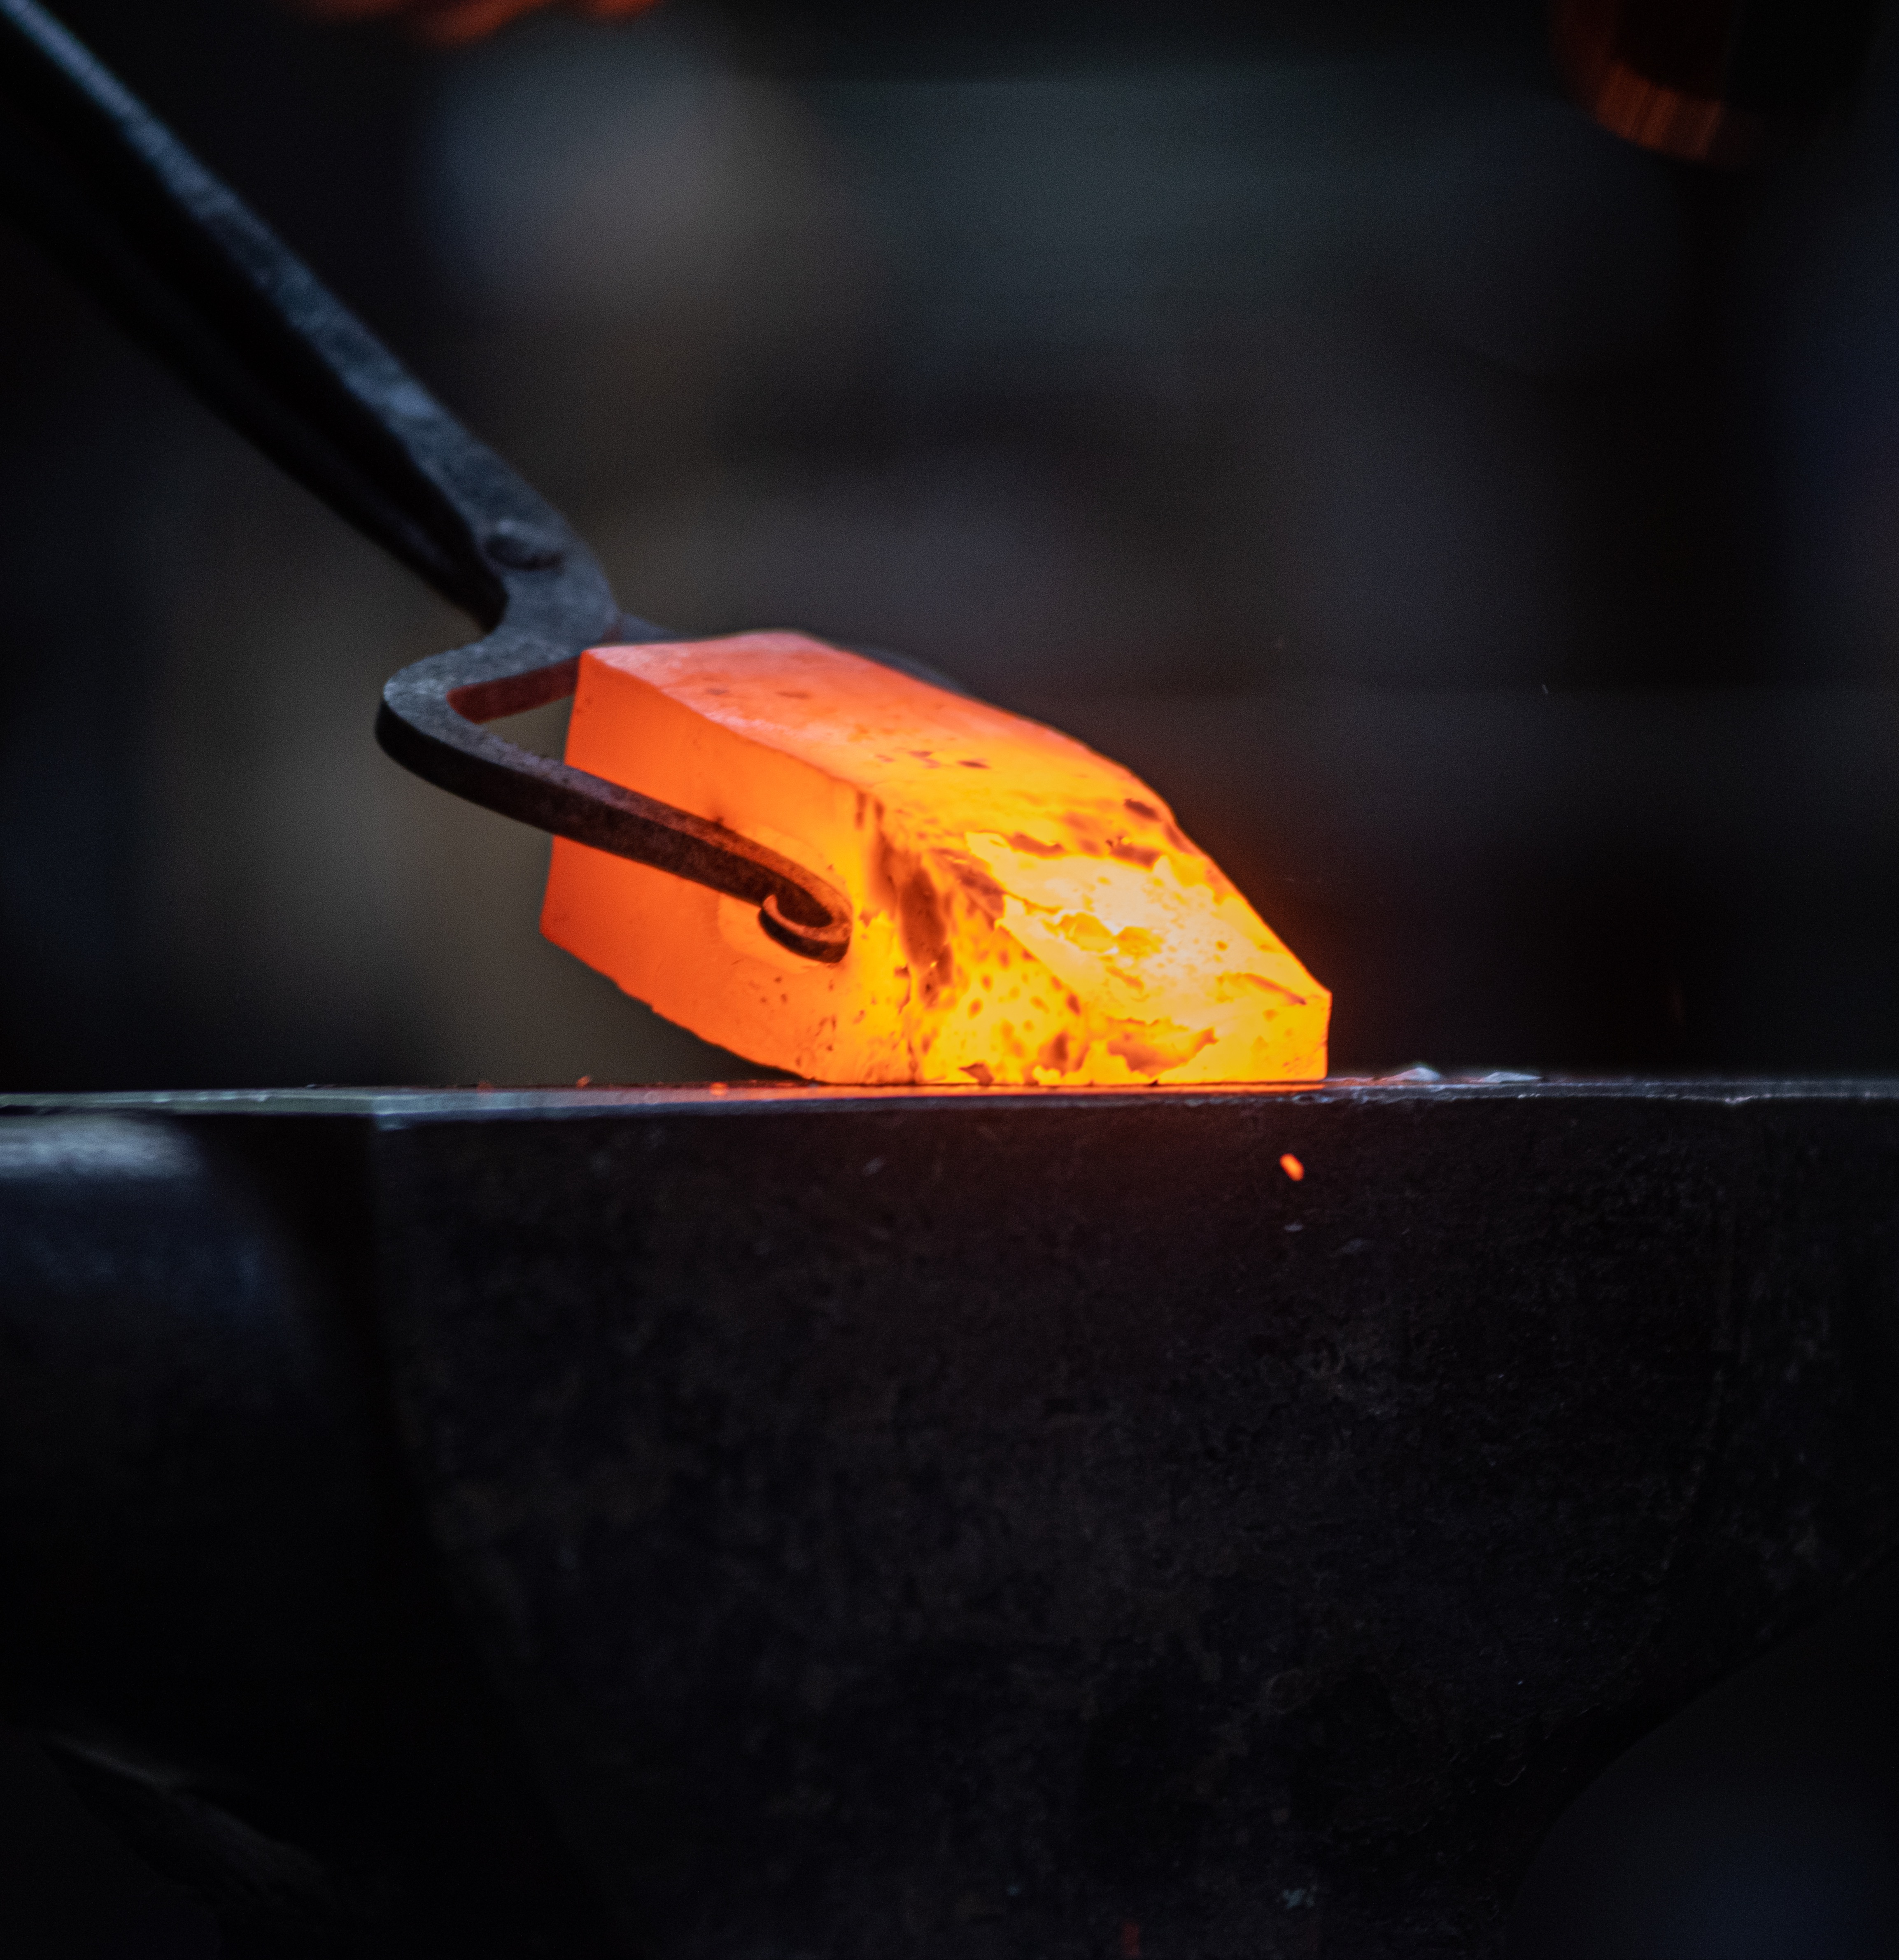 Blacksmith holding a piece of heated metal in tongs